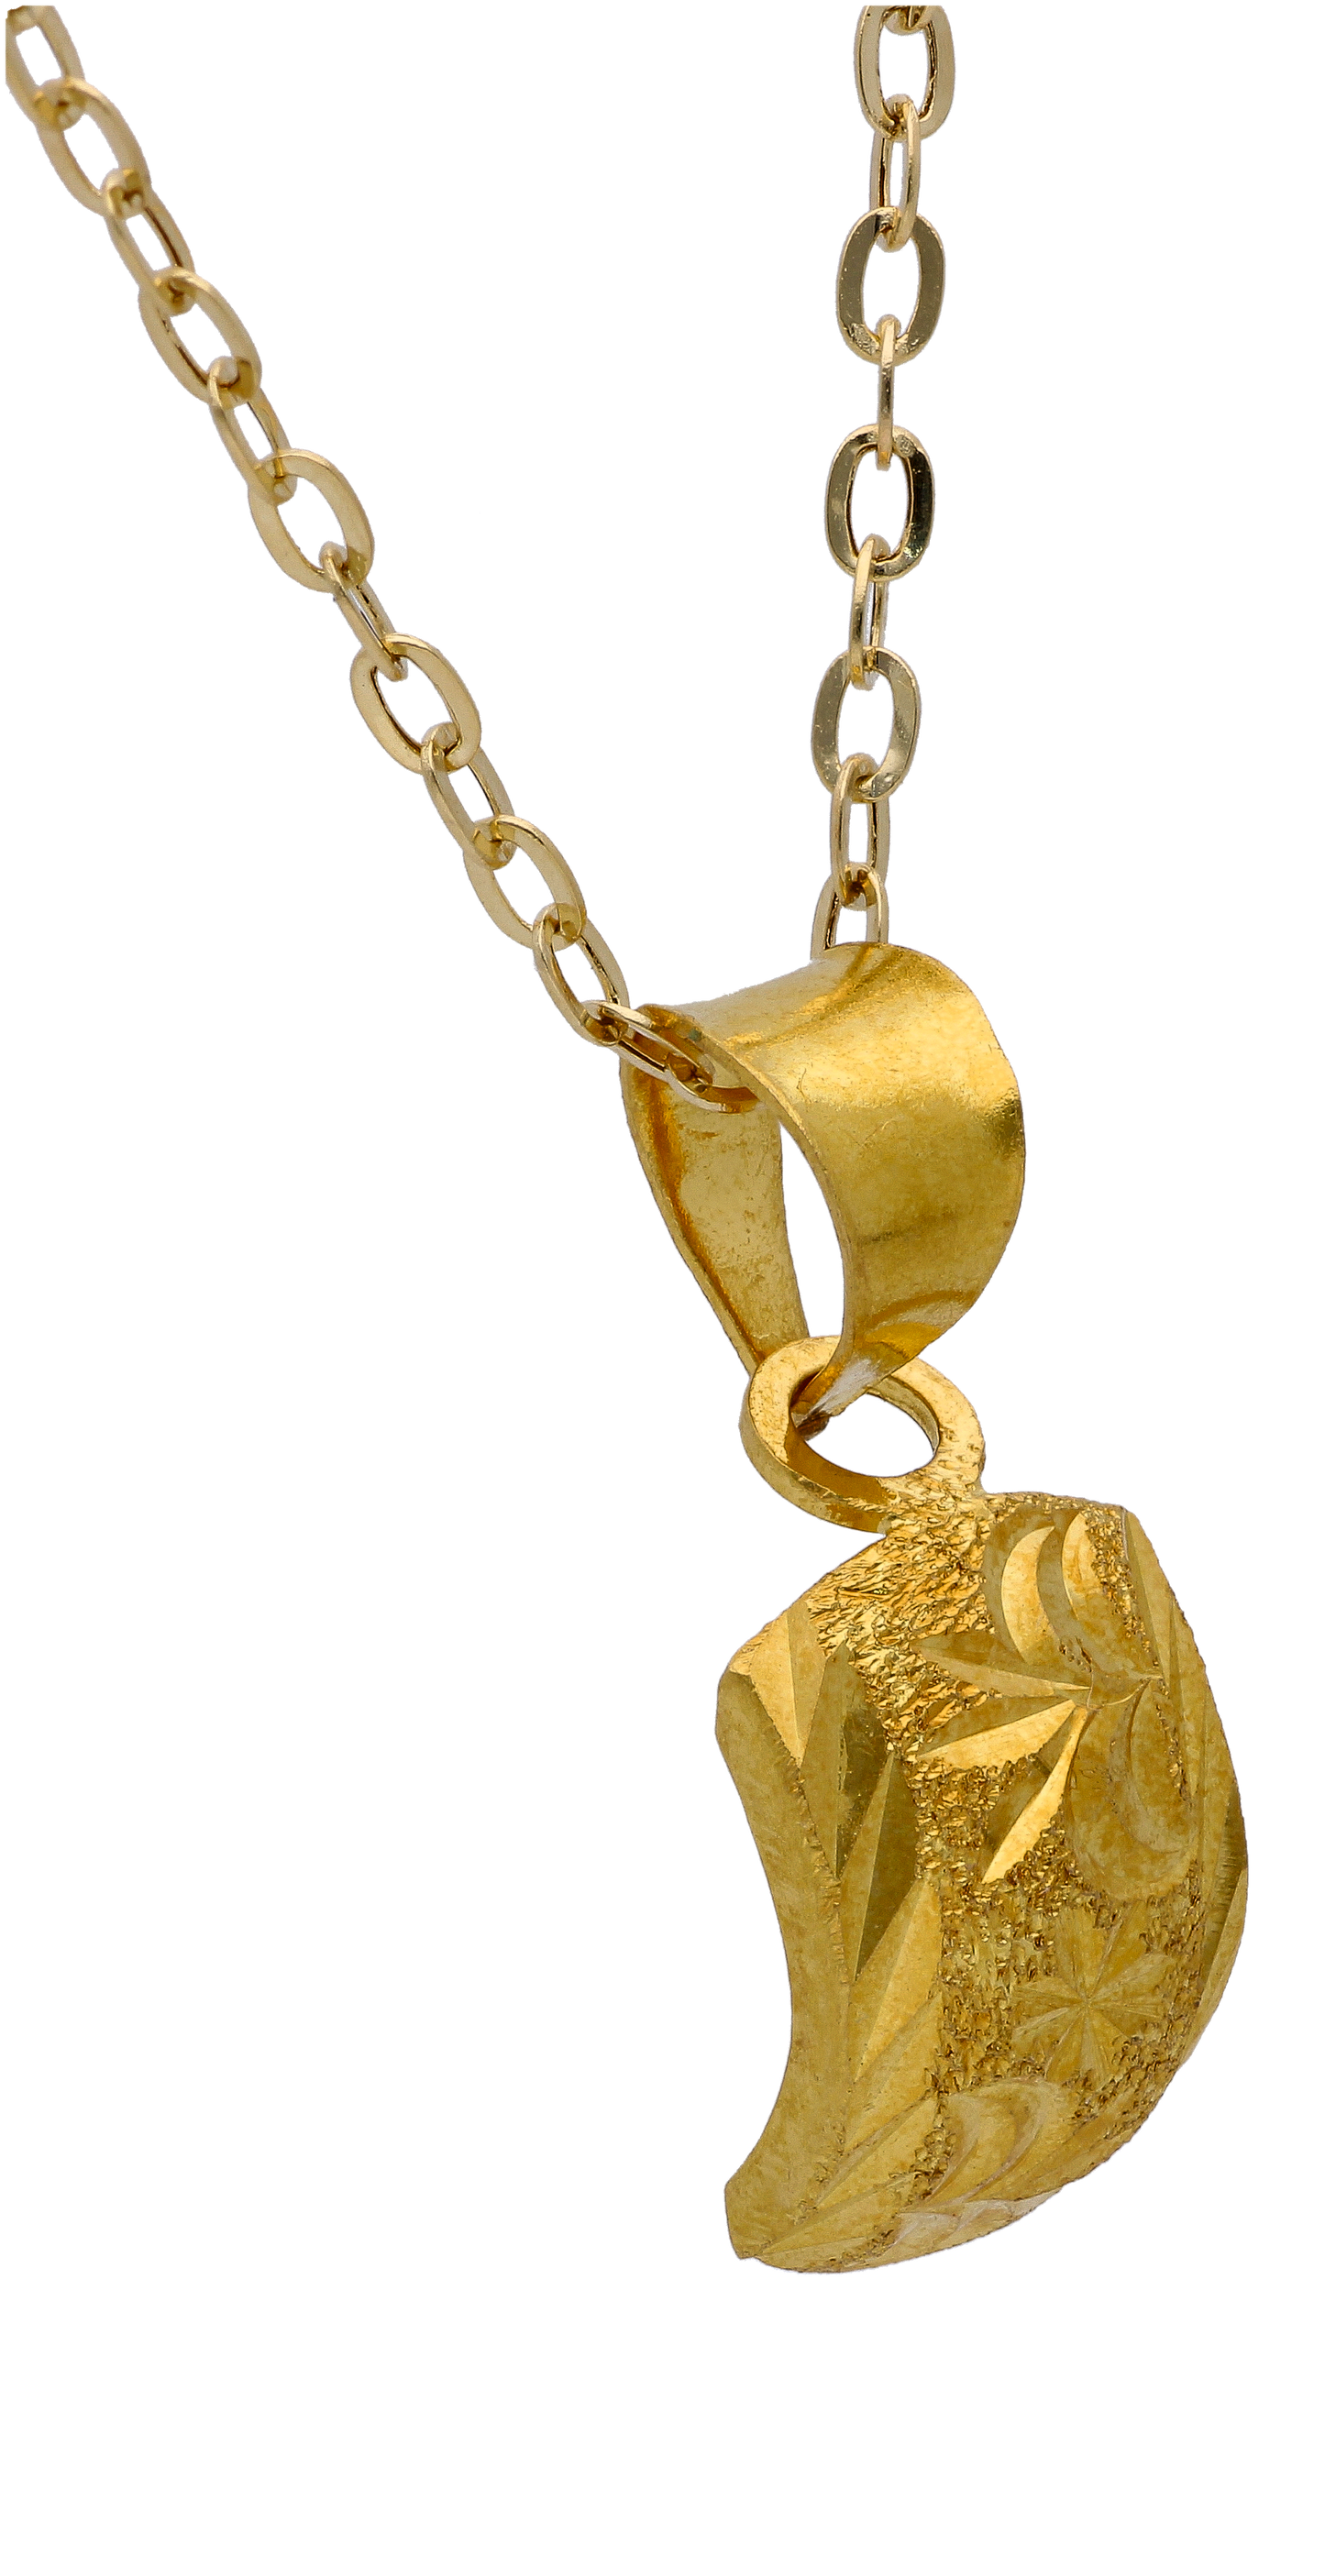 Gold Necklace (Chain with Gold Pendant) 18KT - FKJNKL18KU6290